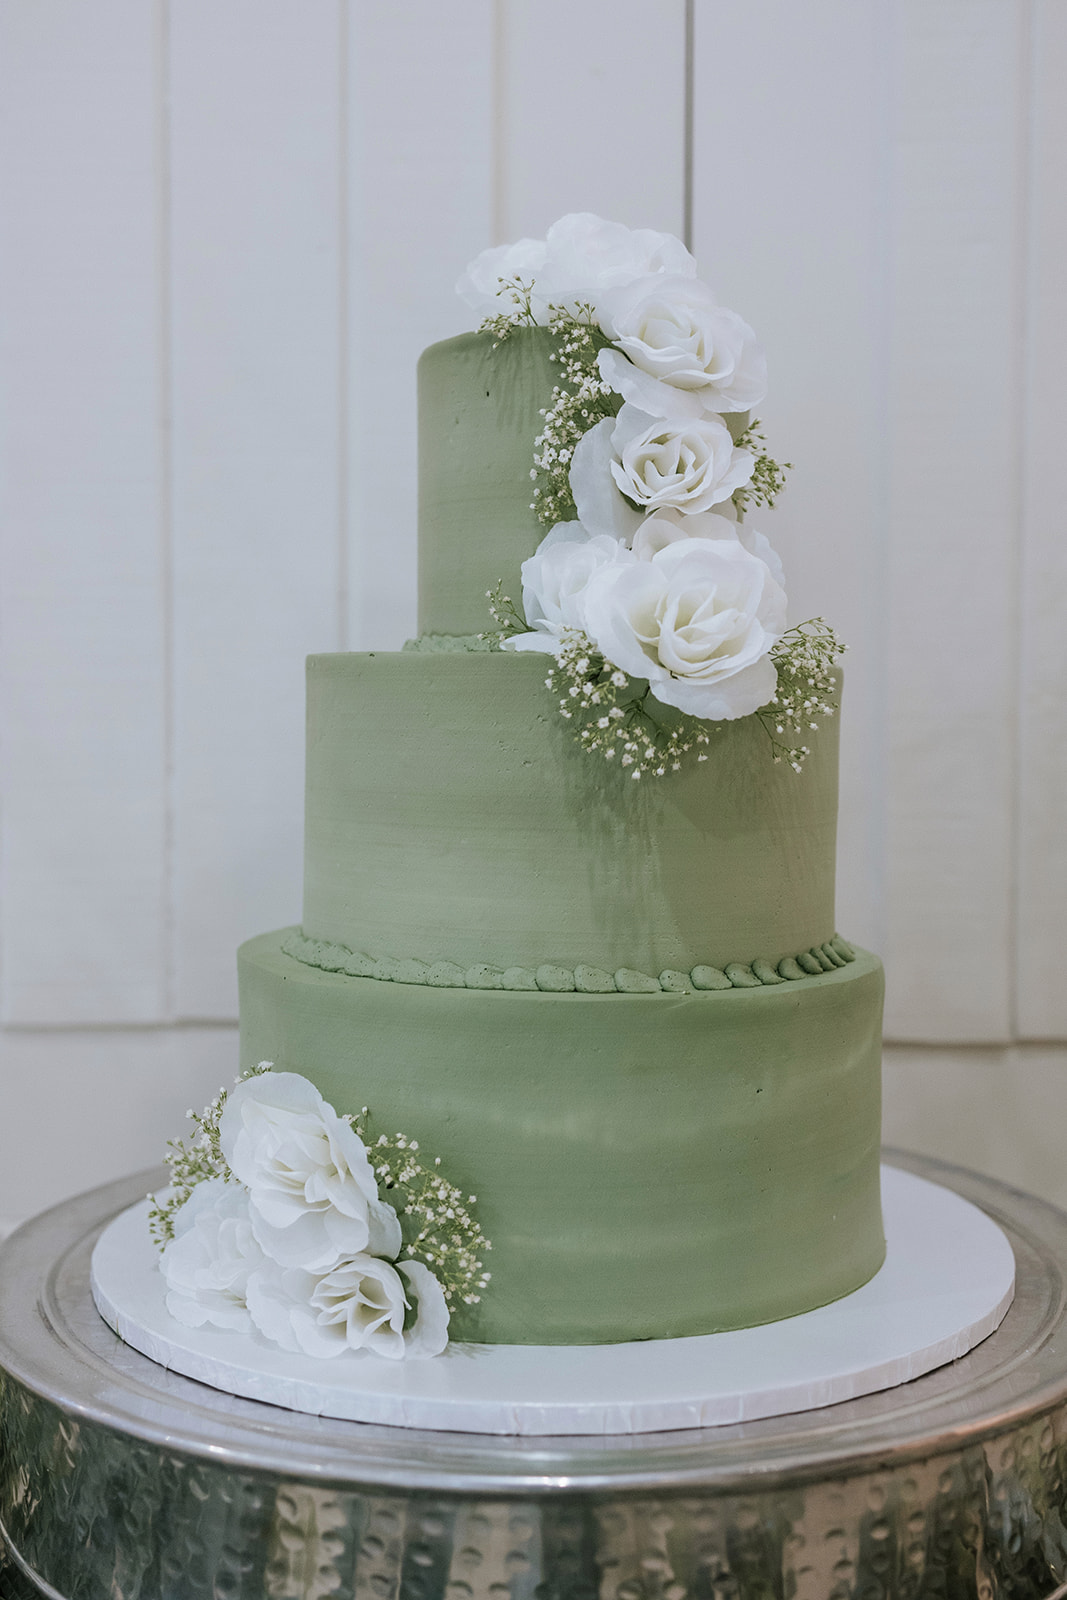 Beautiful Cake In green Color and White flowers.